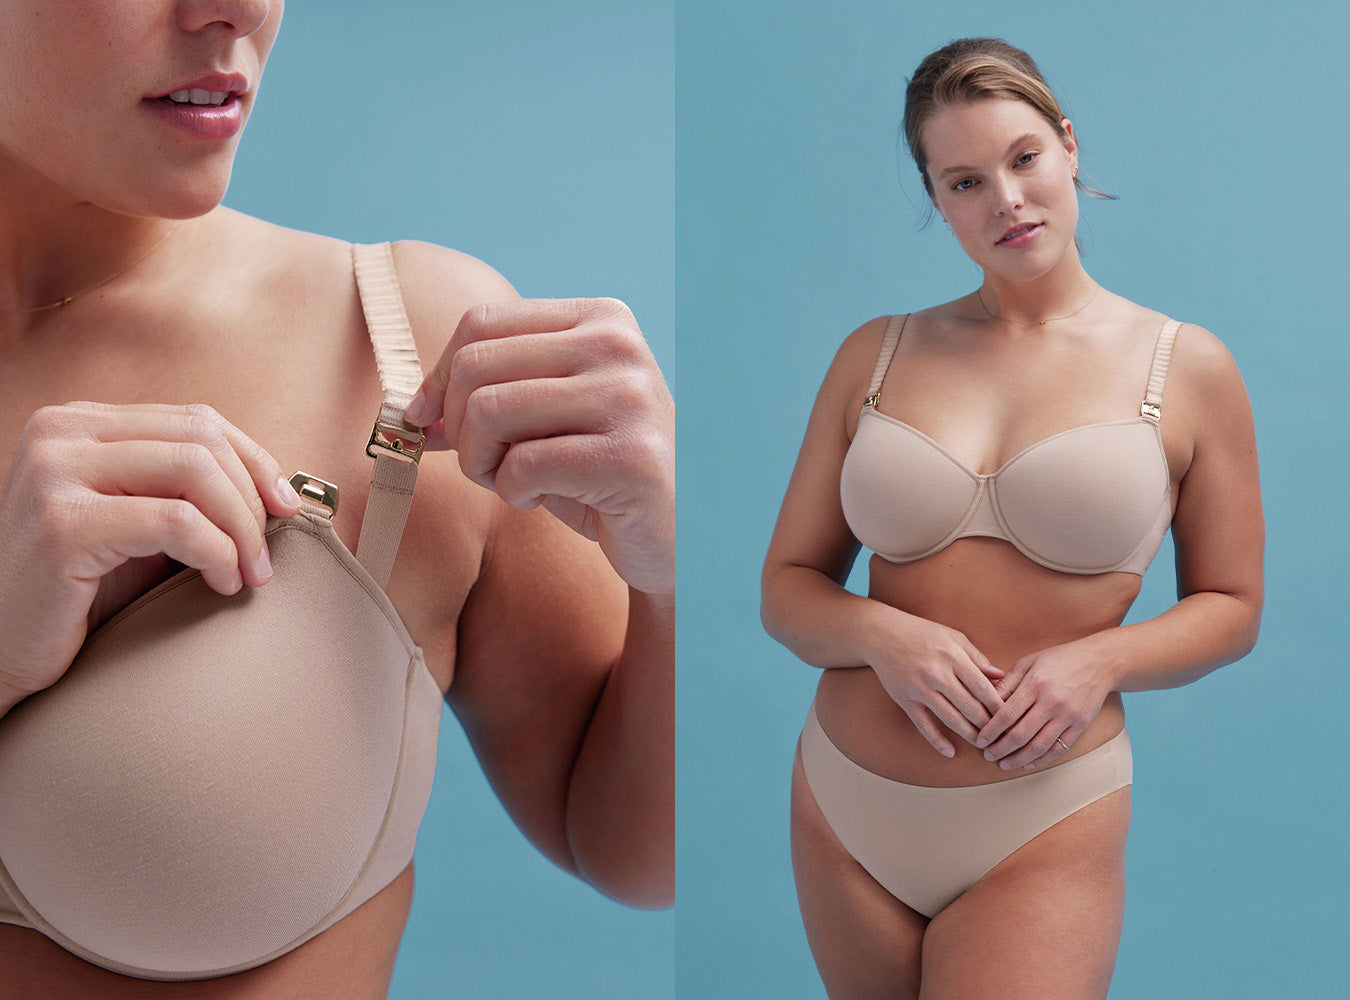 Nursing Bras 101: Finding The Right Size, Comfort Level